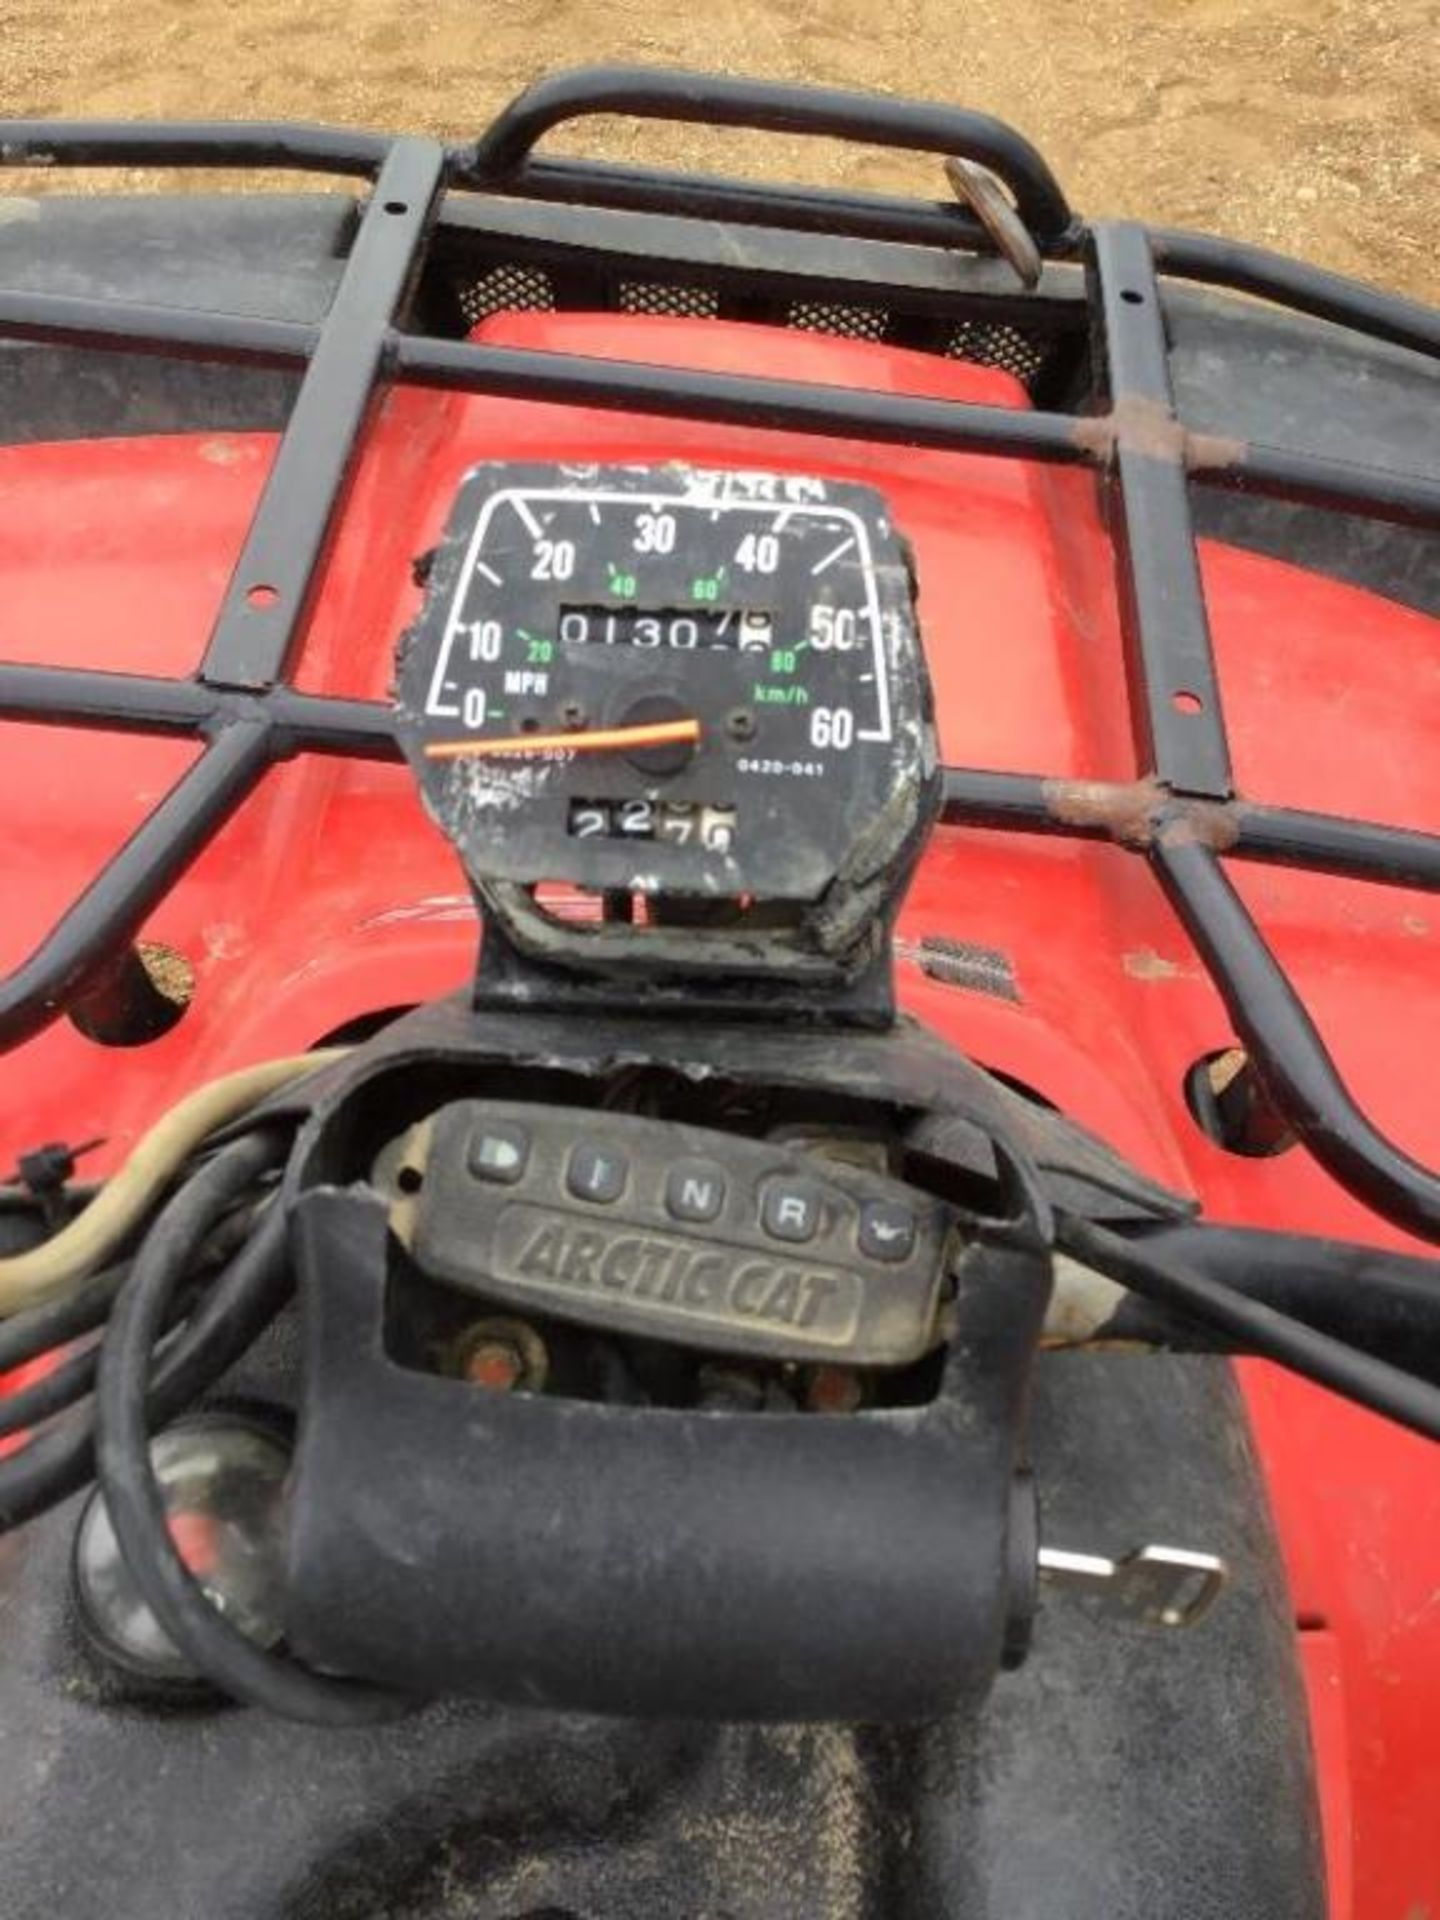 2004 Arctic 500i Automatic 4x4 Quad Winch. No VIN available - Image 10 of 13